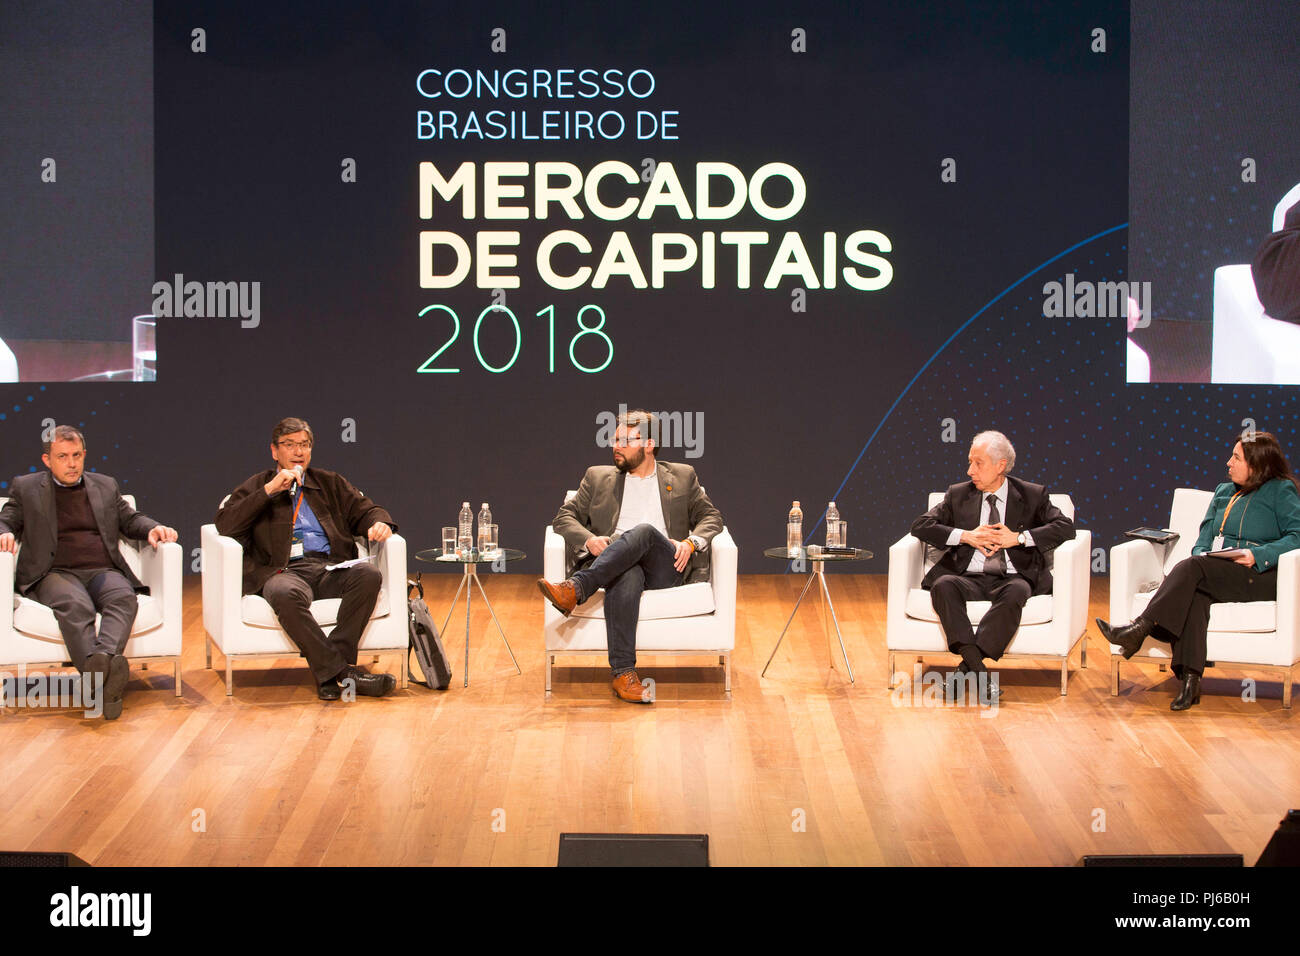 SÃO PAULO, SP - 04.09.2018: ECONOMISTAS FALAM EM EVENTO EM SP - Representatives and heads of government plans of some of the main candidates for the presidency of the republic participated, on Tuesday night (04), an event promoted by companies in the financial market in São Paulo. In the photo, economists Nelson Marconi (PDT), Marcio Pochmann (PT), Diogo Costa (NOVO) and Persio Arida (PSDB). (Photo: Bruno Rocha/Fotoarena) Stock Photo